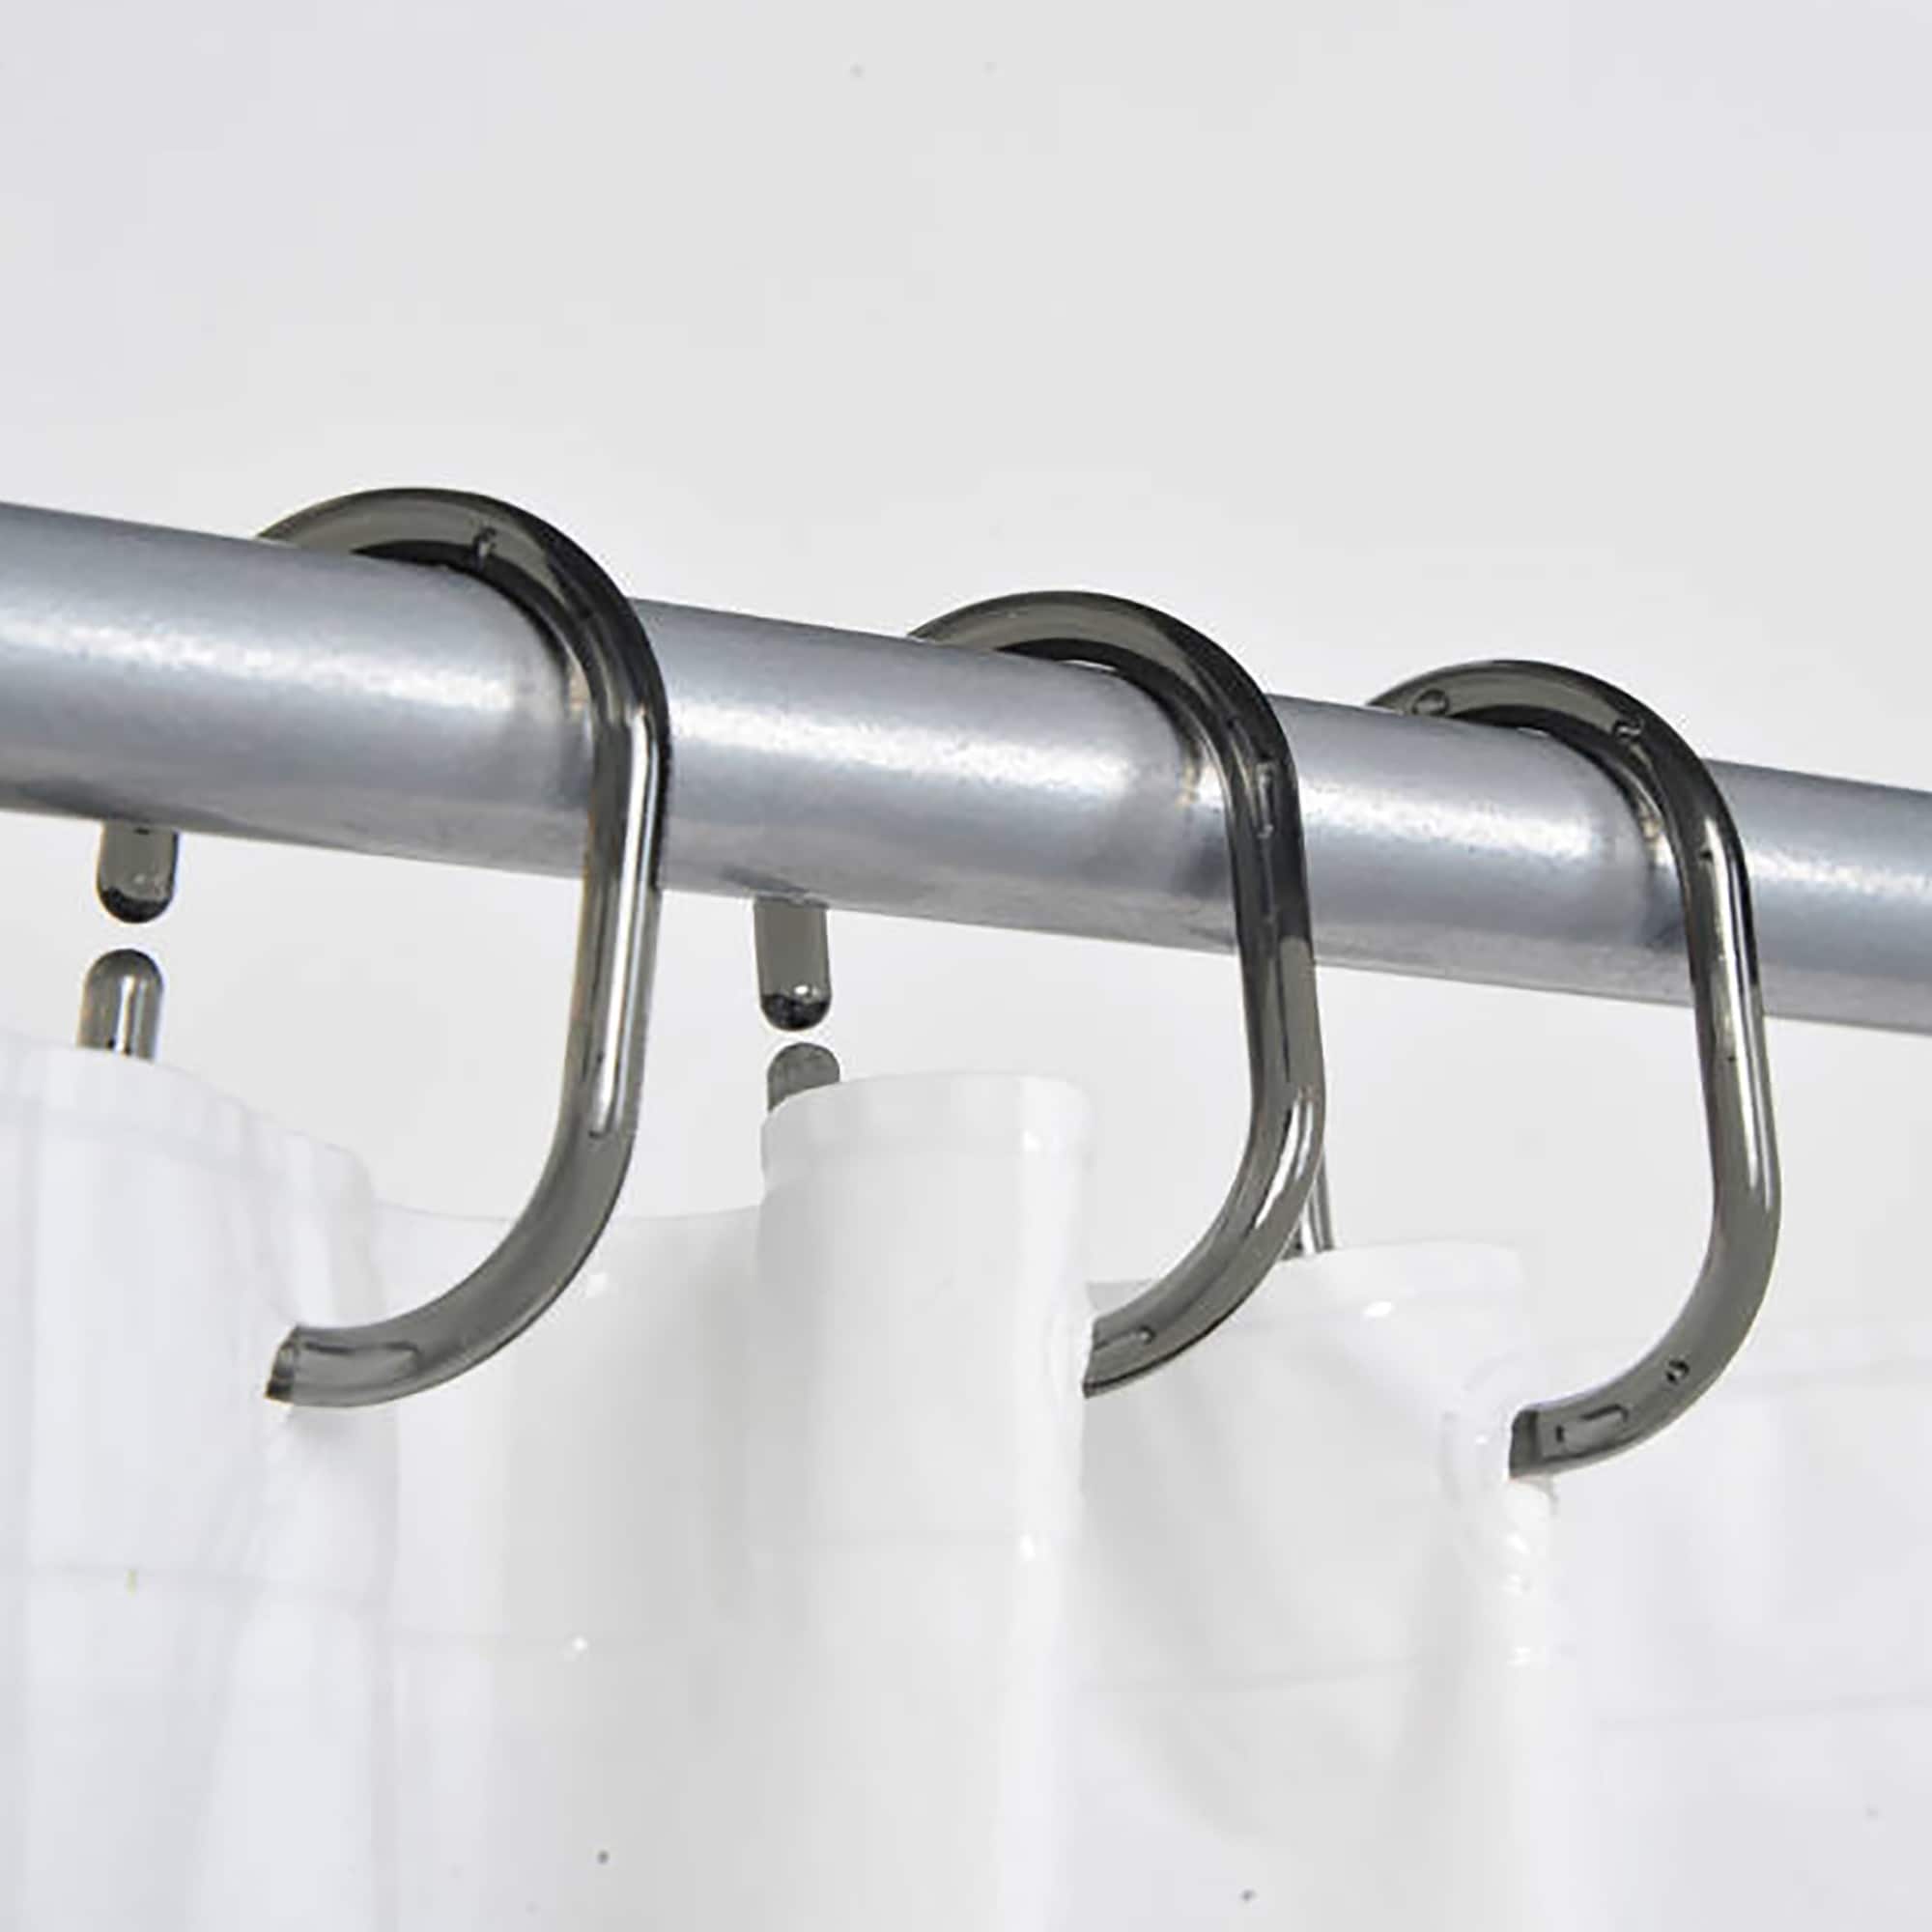 Shower Curtain Hooks Rust Proof (Set of 12) - Stainless Steel Shower  Curtain Rings with Effortless Gliding Roller Balls - Easy to Install Shower  Hooks